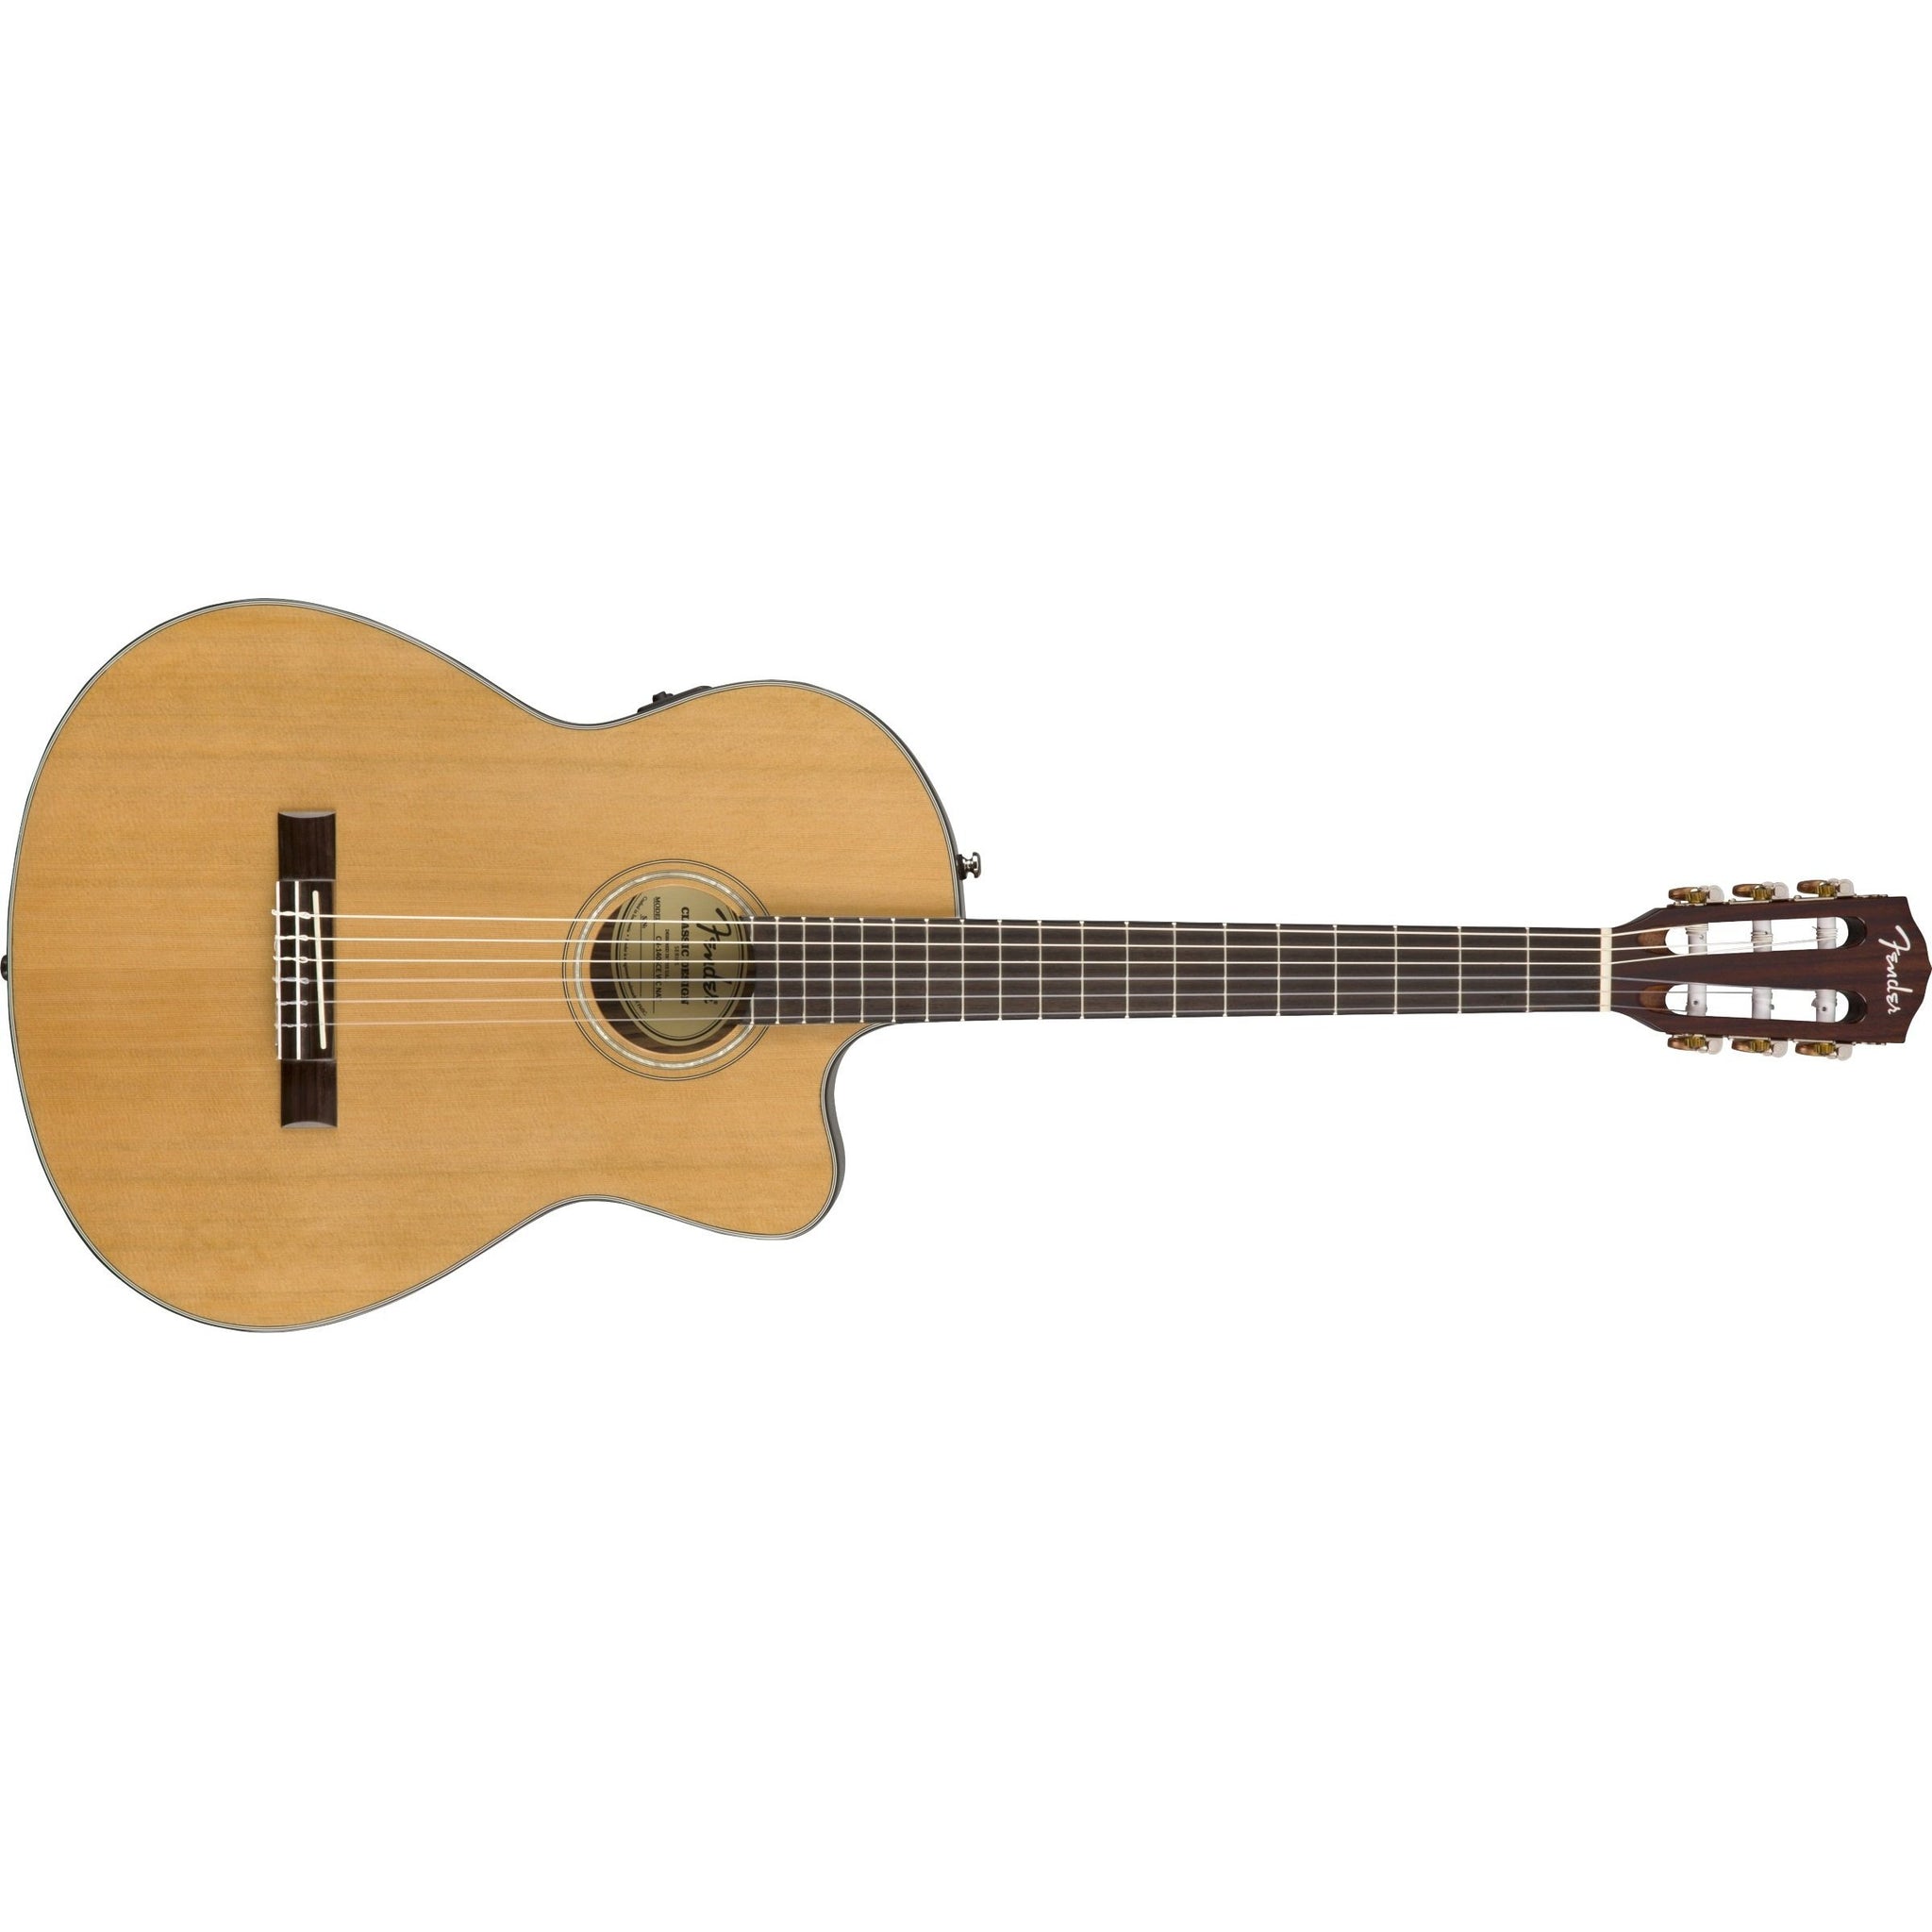 Fender CN-140SCE Thinline Classical/Electric Guitar with Hardshell Case-Natural-Music World Academy